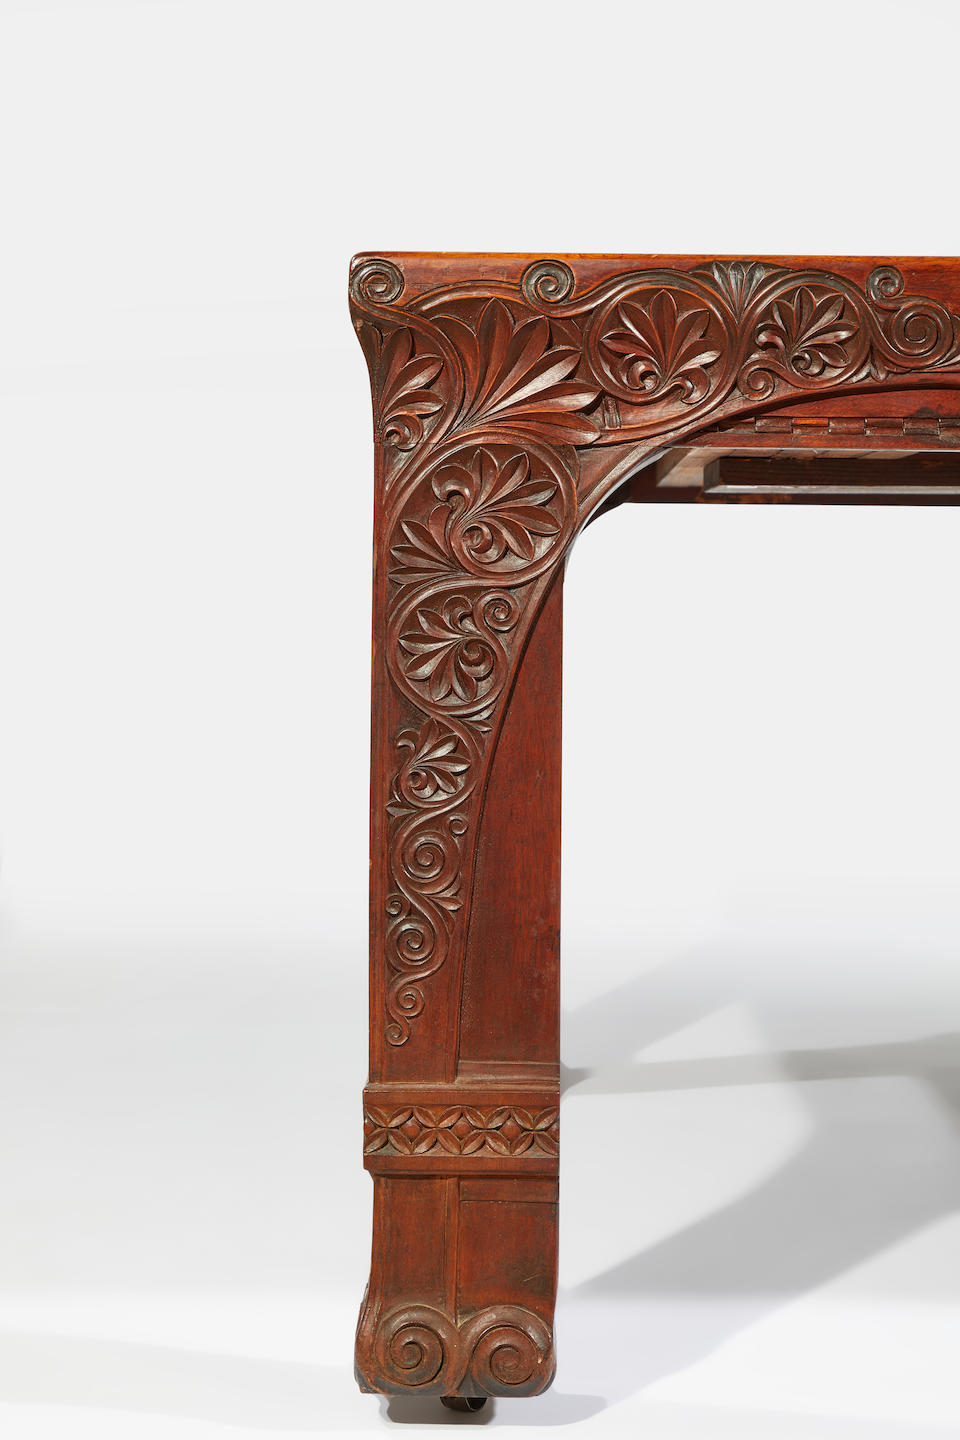 Isaac Scott (1845-1920) Dining table1894carved walnut, signed "Isaac Scott" and dated 1894 to one leg, with four additional leavesheight 30 1/2in; width 121in (extended); depth 54in